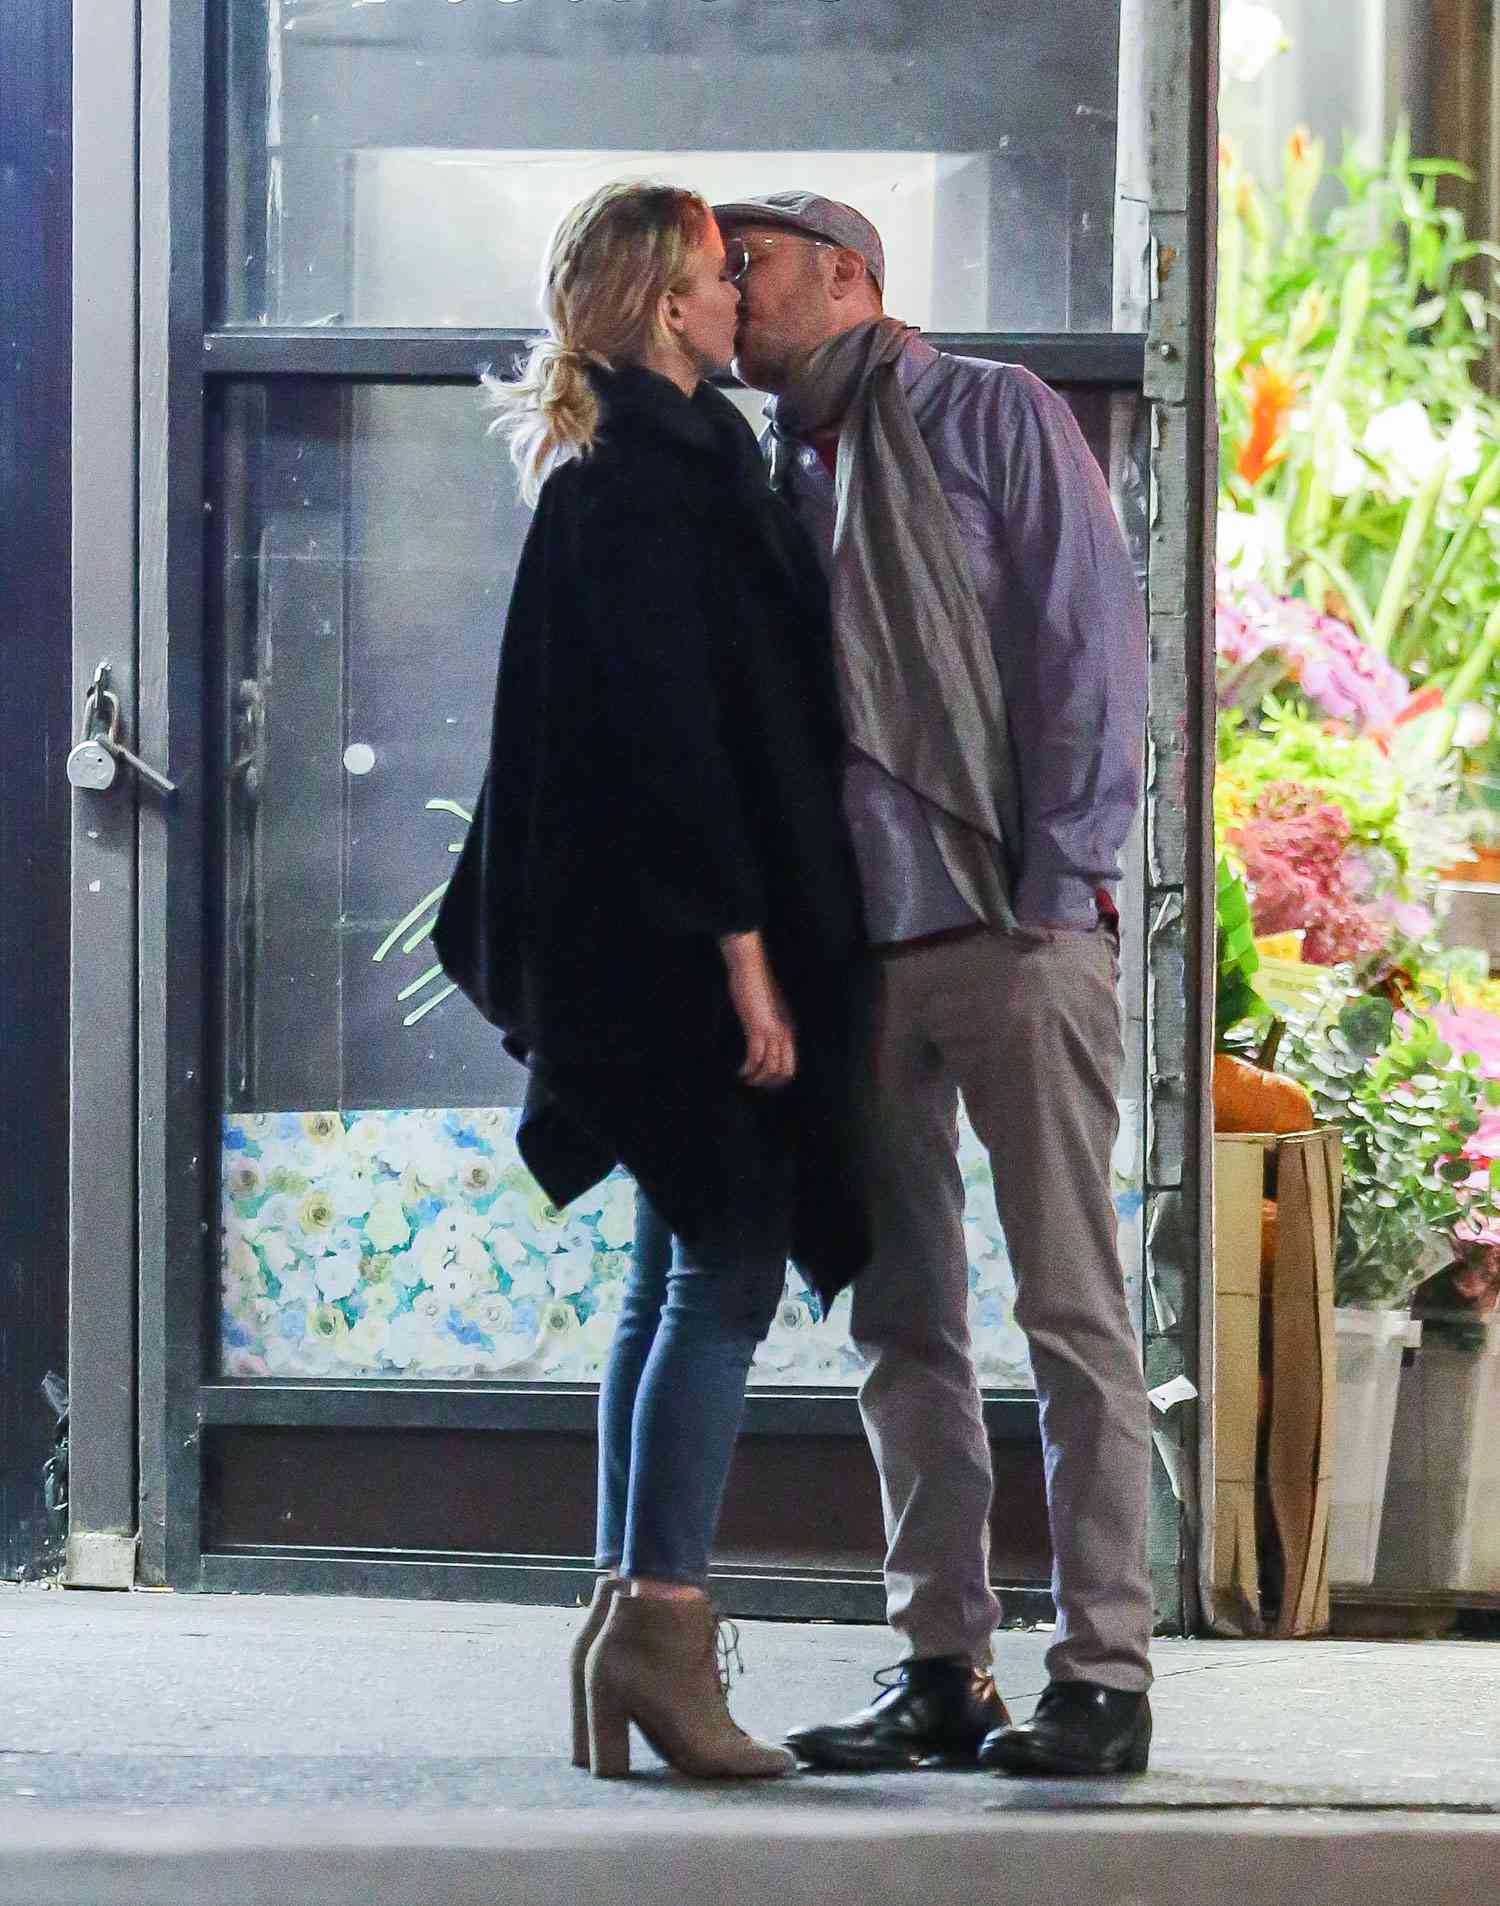 PREMIUM EXCLUSIVE: Jennifer Lawrence and Darren Aronofsky Spotted Canoodling in NYC